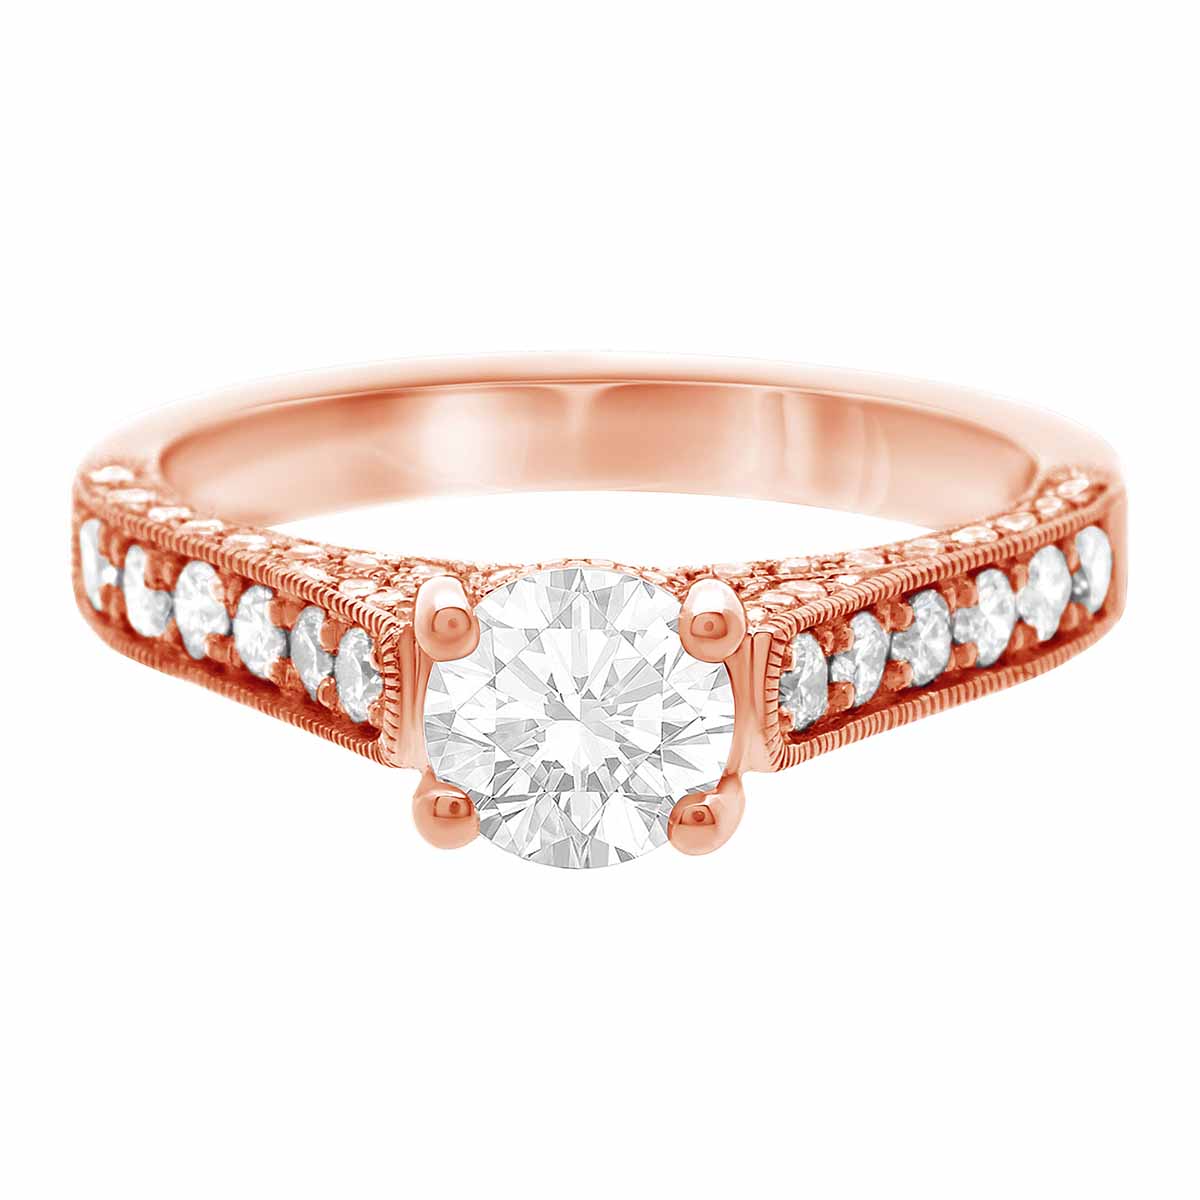 Diamond Encrusted Engagement Ring made in rose gold